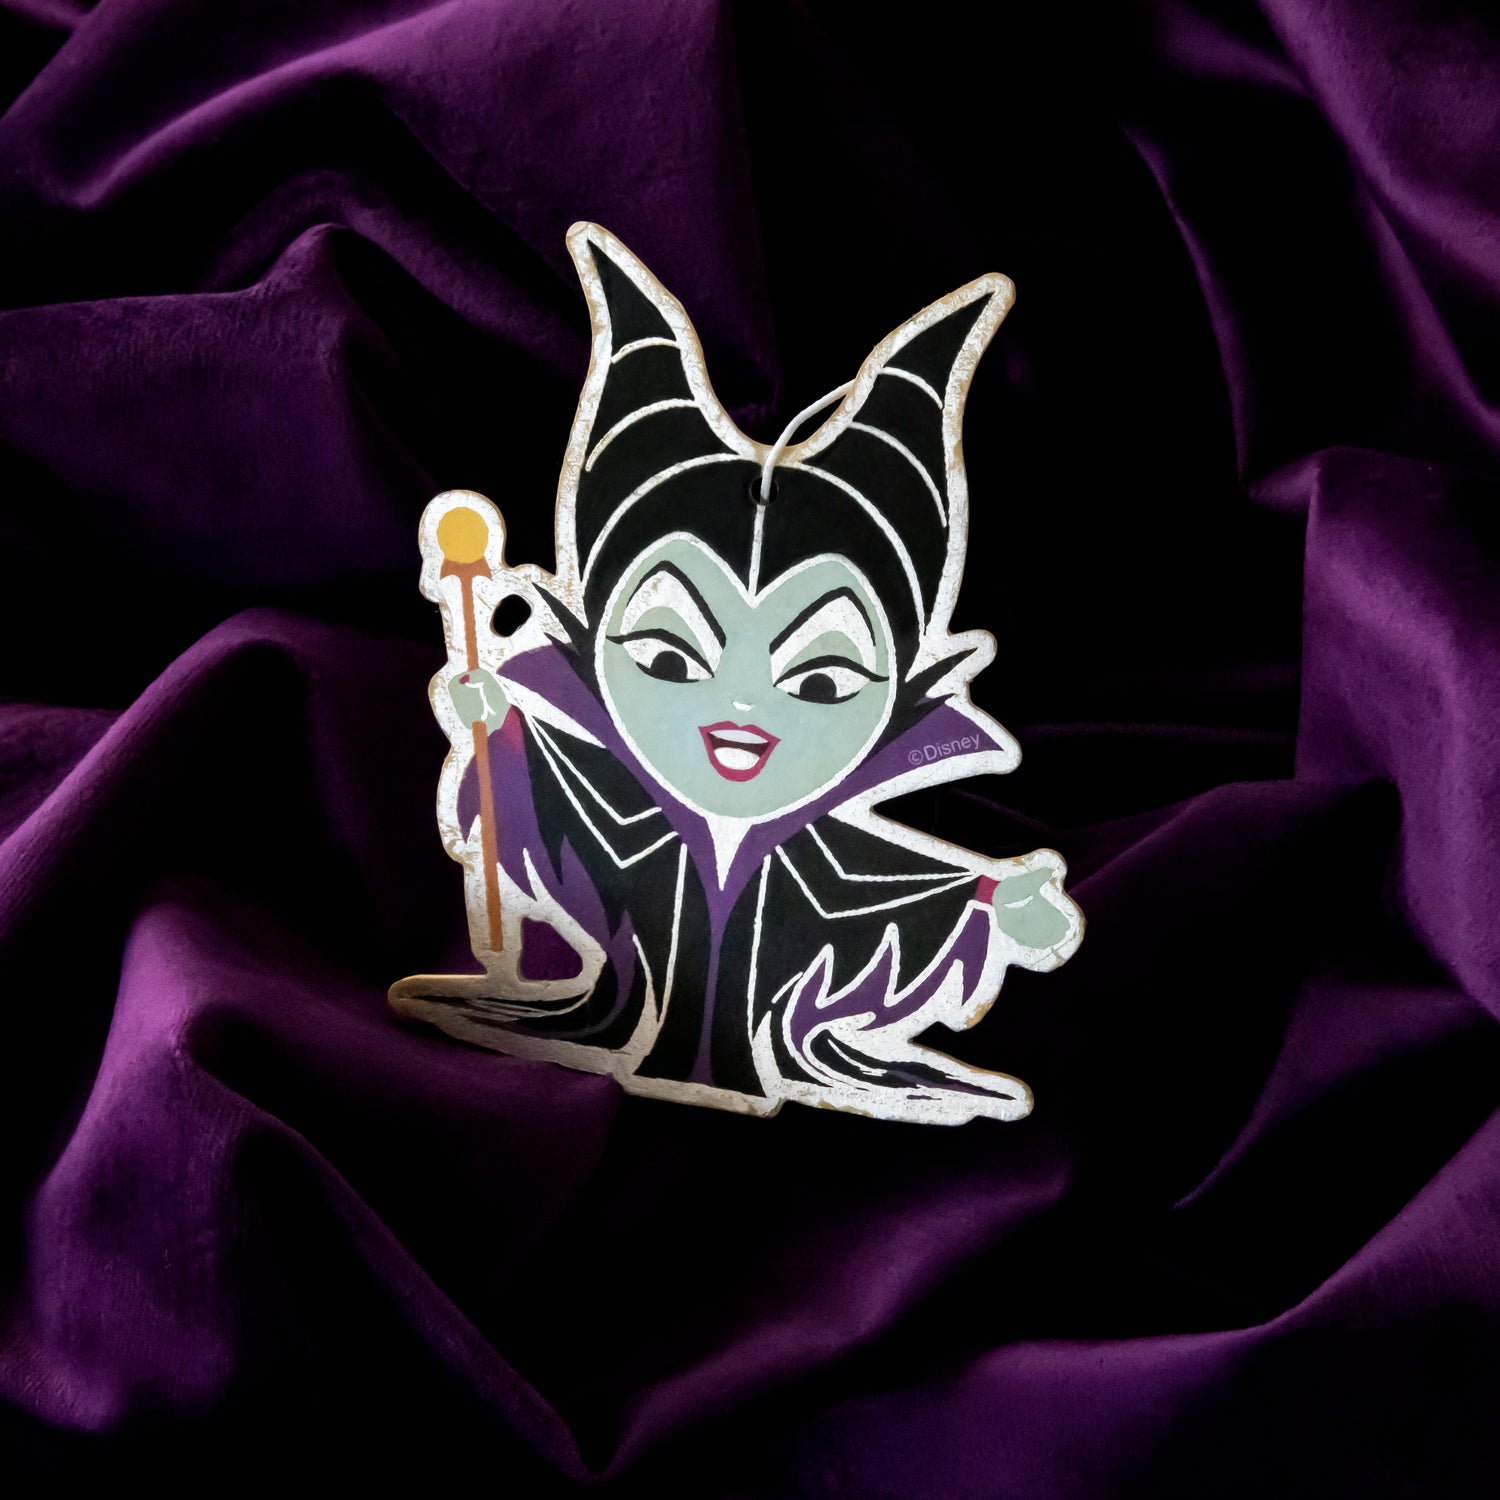 Disney Villains Maleficent Collection Pack